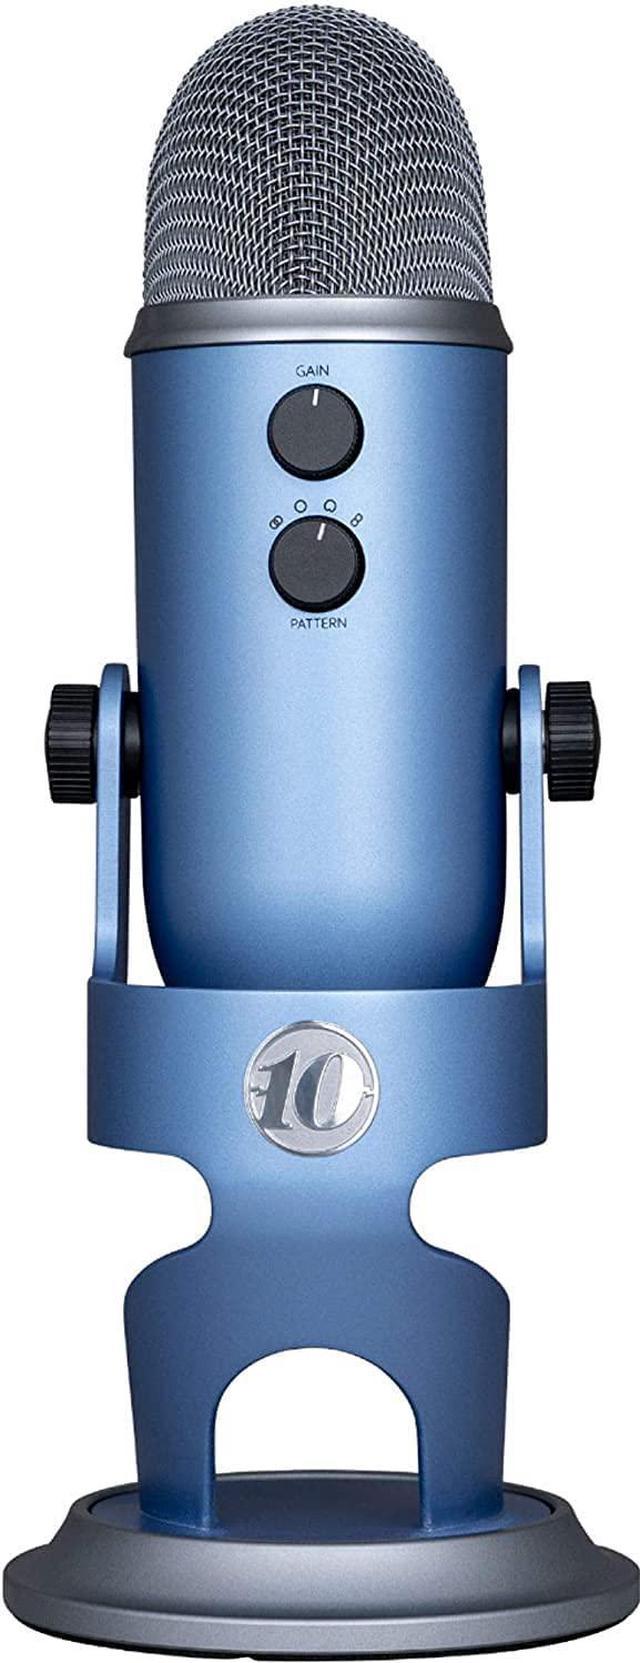 NeweggBusiness - Blue Yeti USB Microphone for PC, Mac, Gaming, Recording,  Streaming, Podcasting, Studio and Computer Condenser Mic with Blue VO!CE  effects, 4 Pickup Patterns, Plug and Play – Midnight Blue